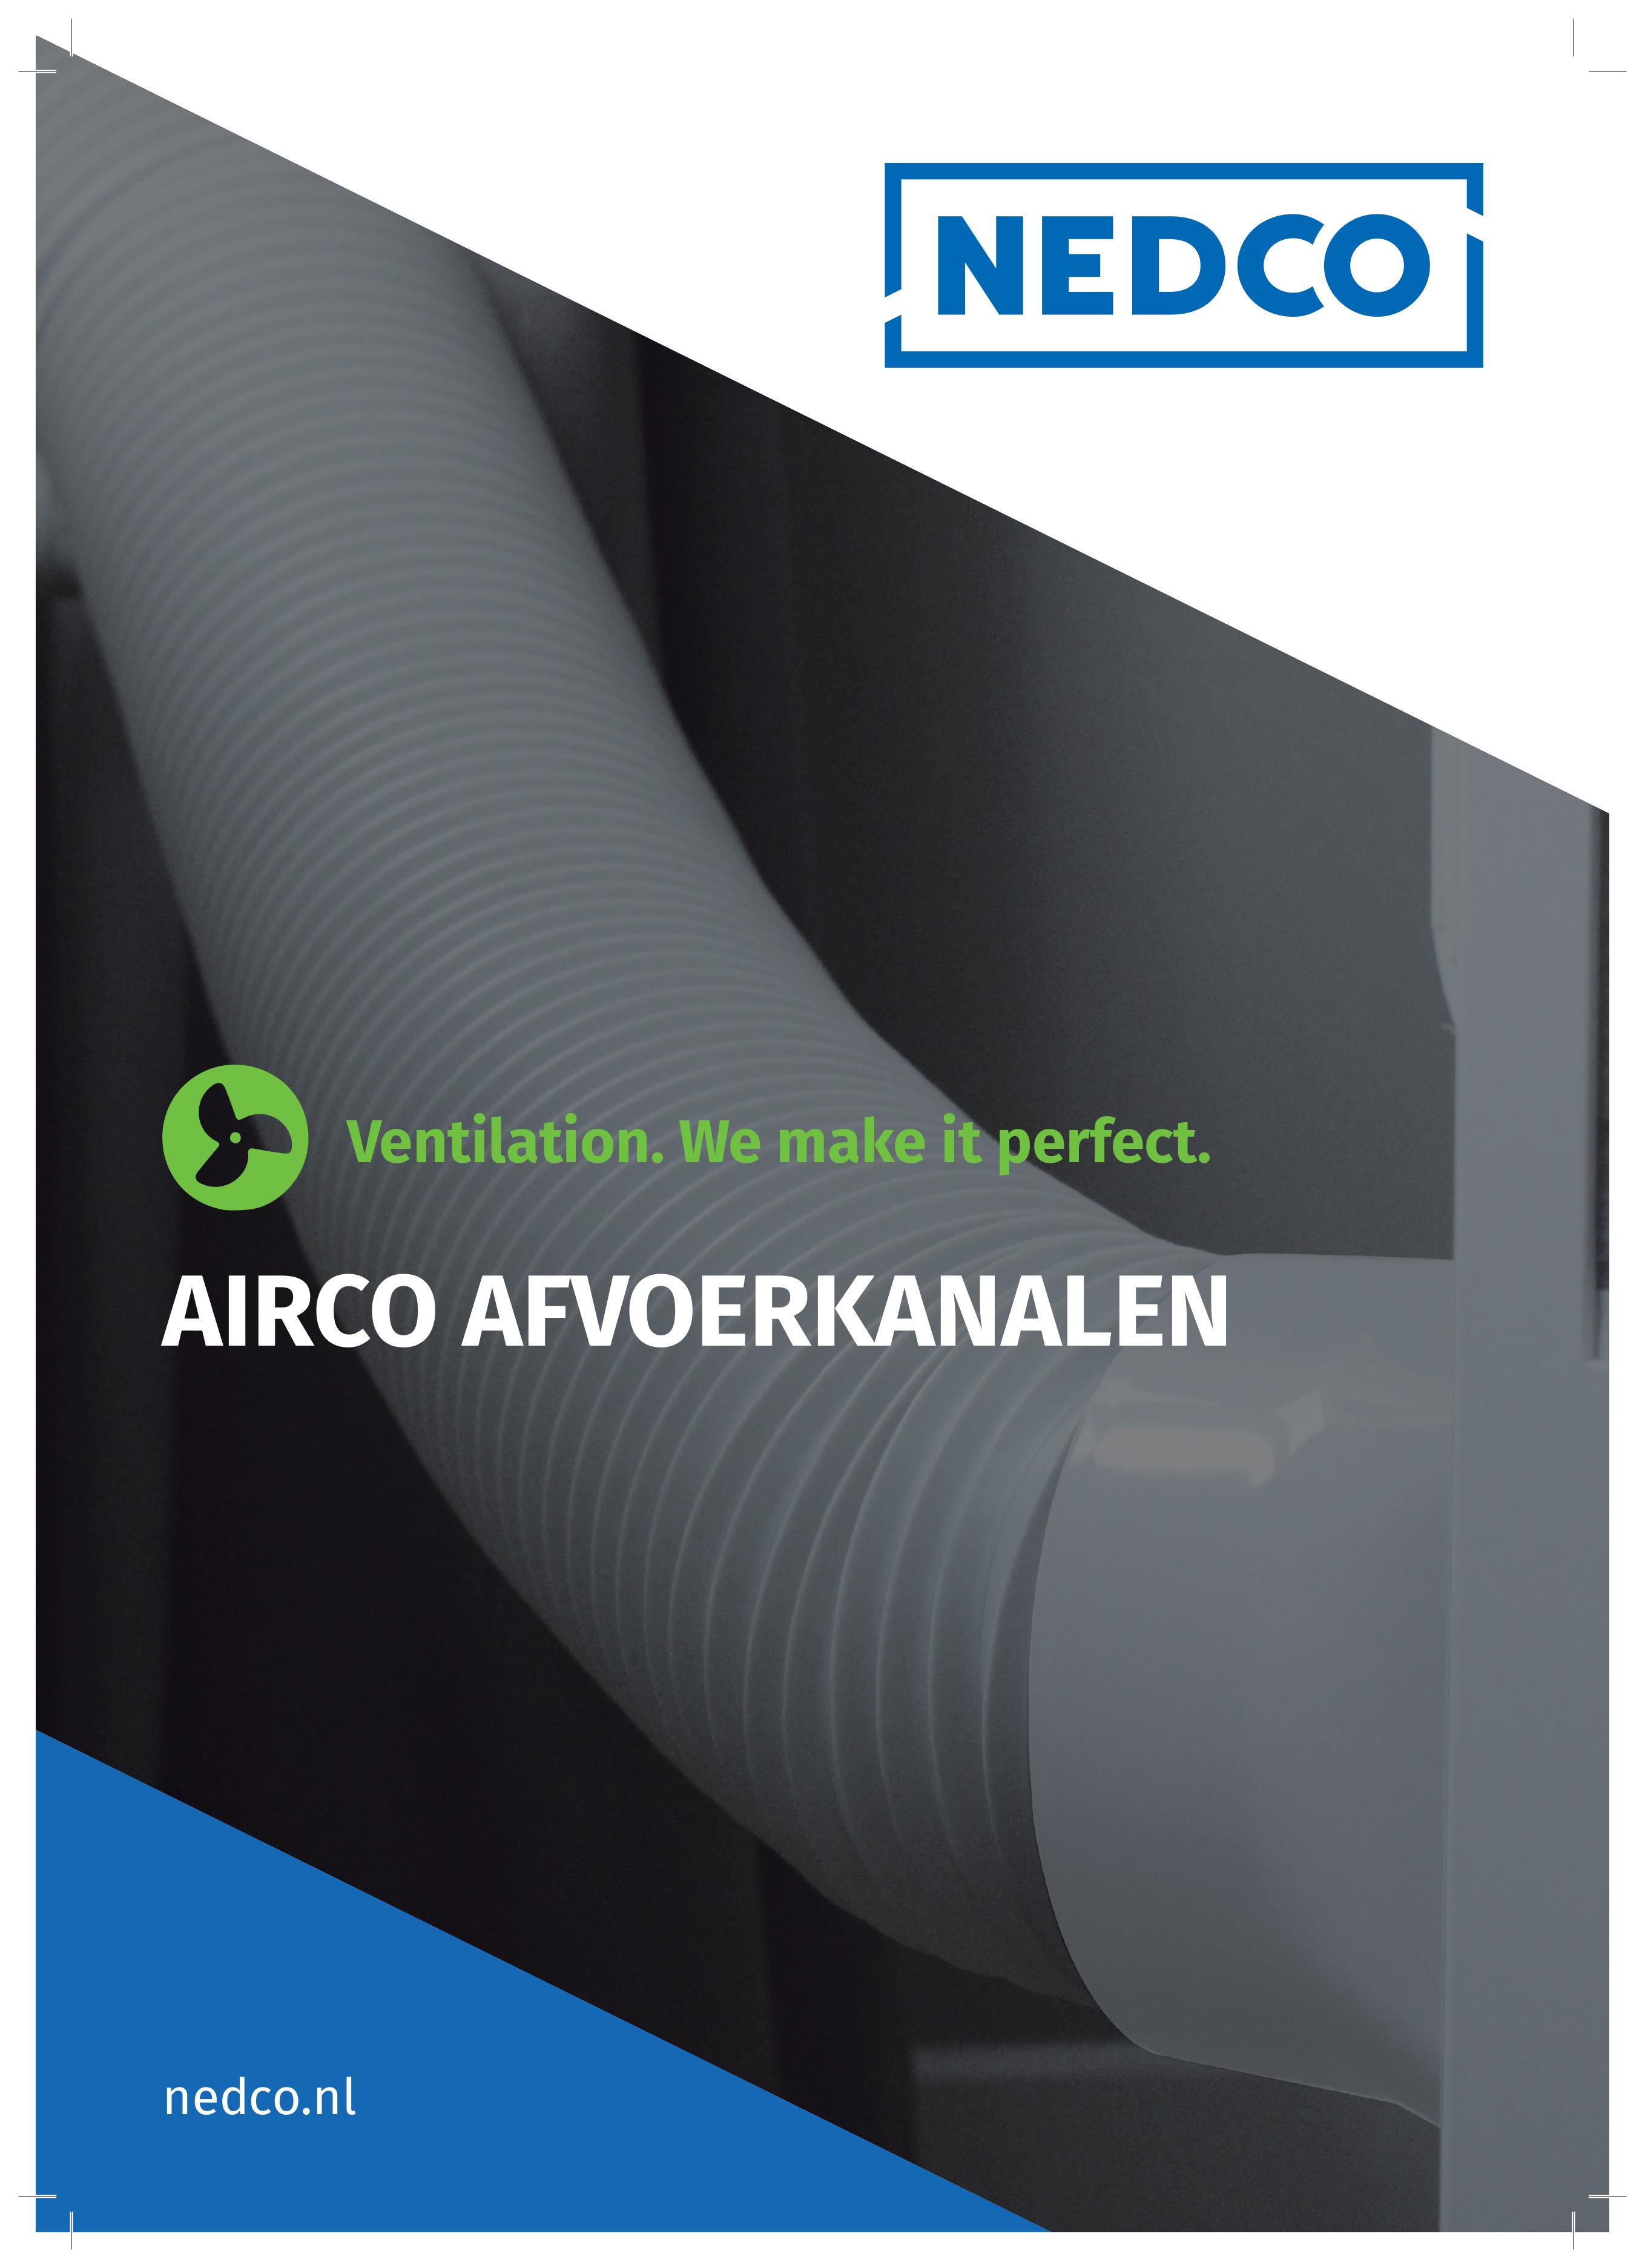 Air conditioning exhaust pipe brochure